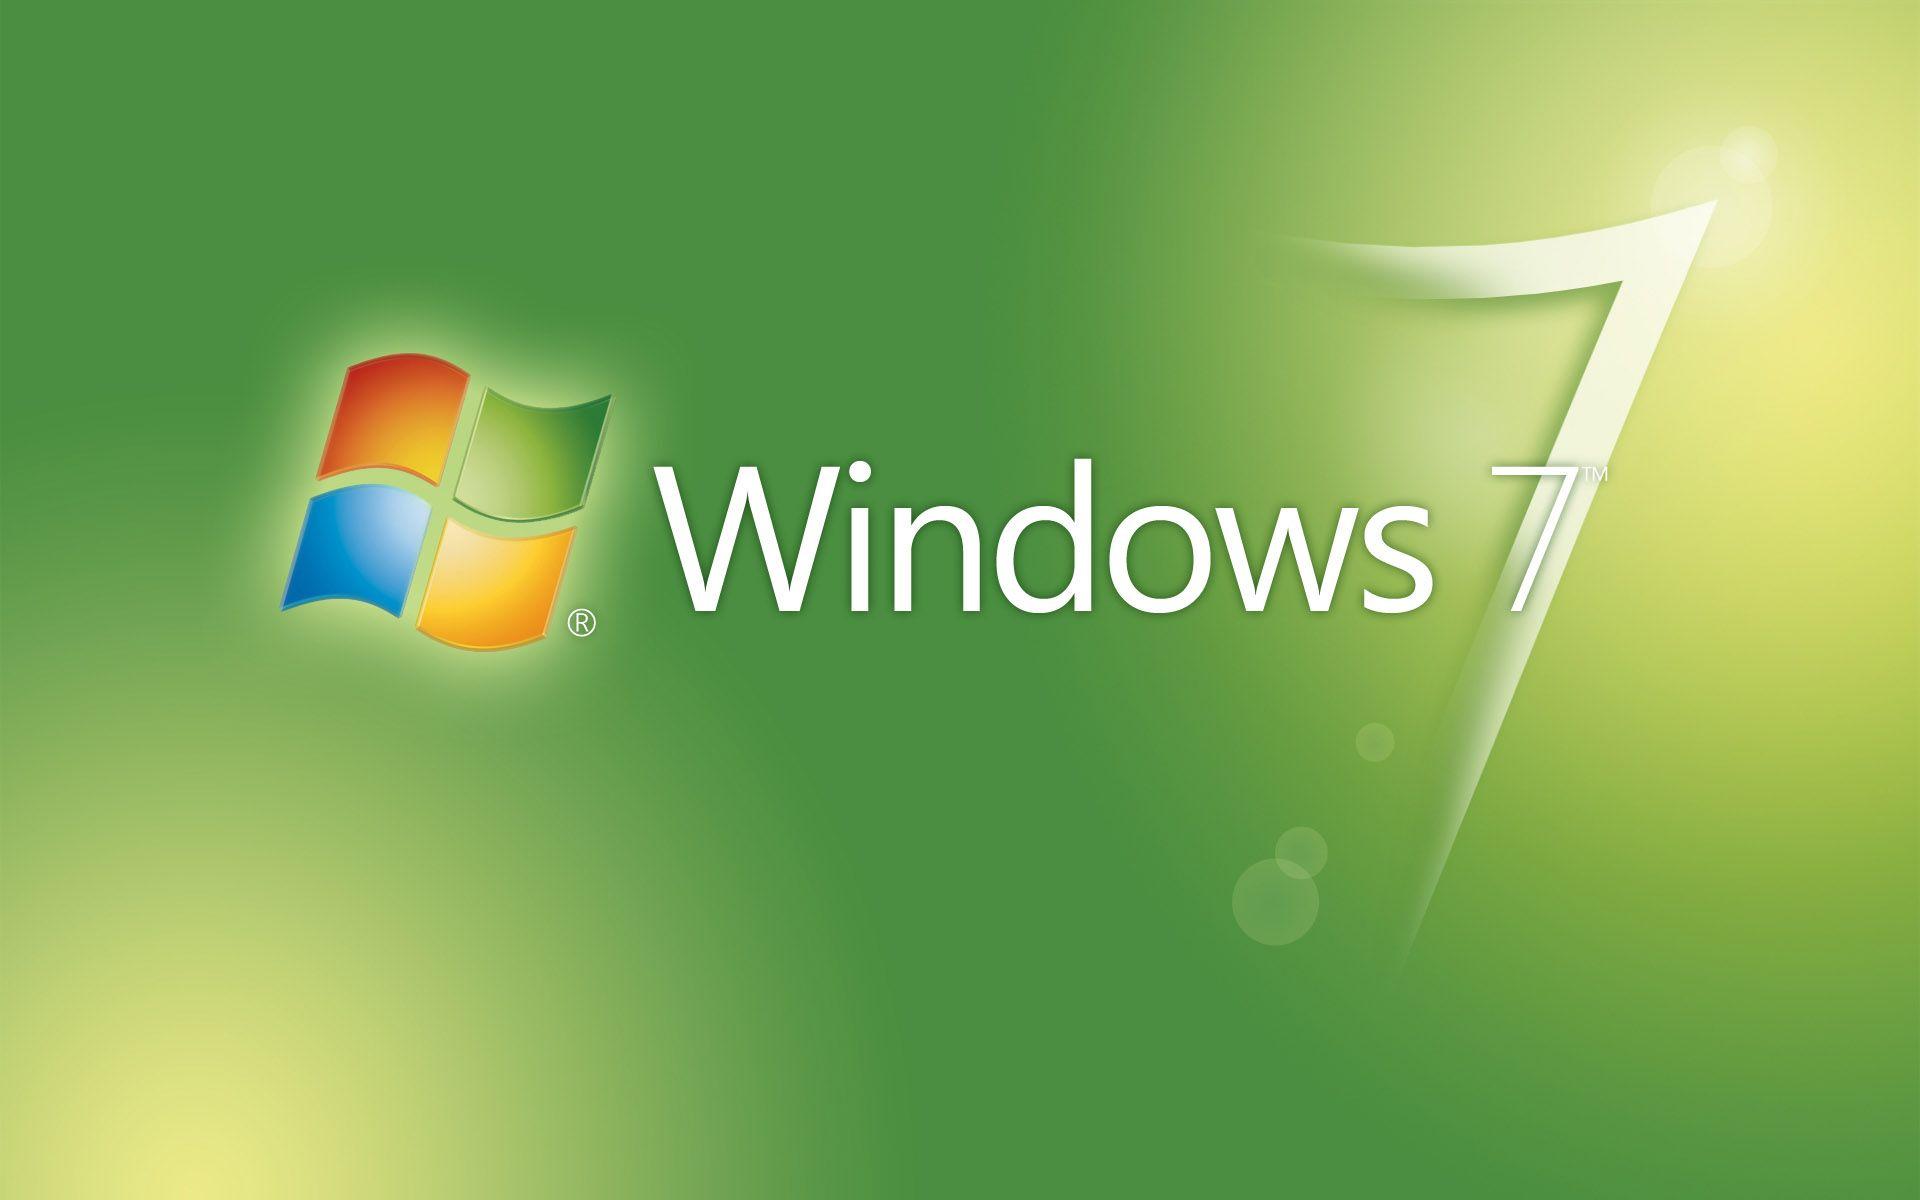 Spectacular HQ Windows 7 Wallpaper to Spice Up Your Desktop